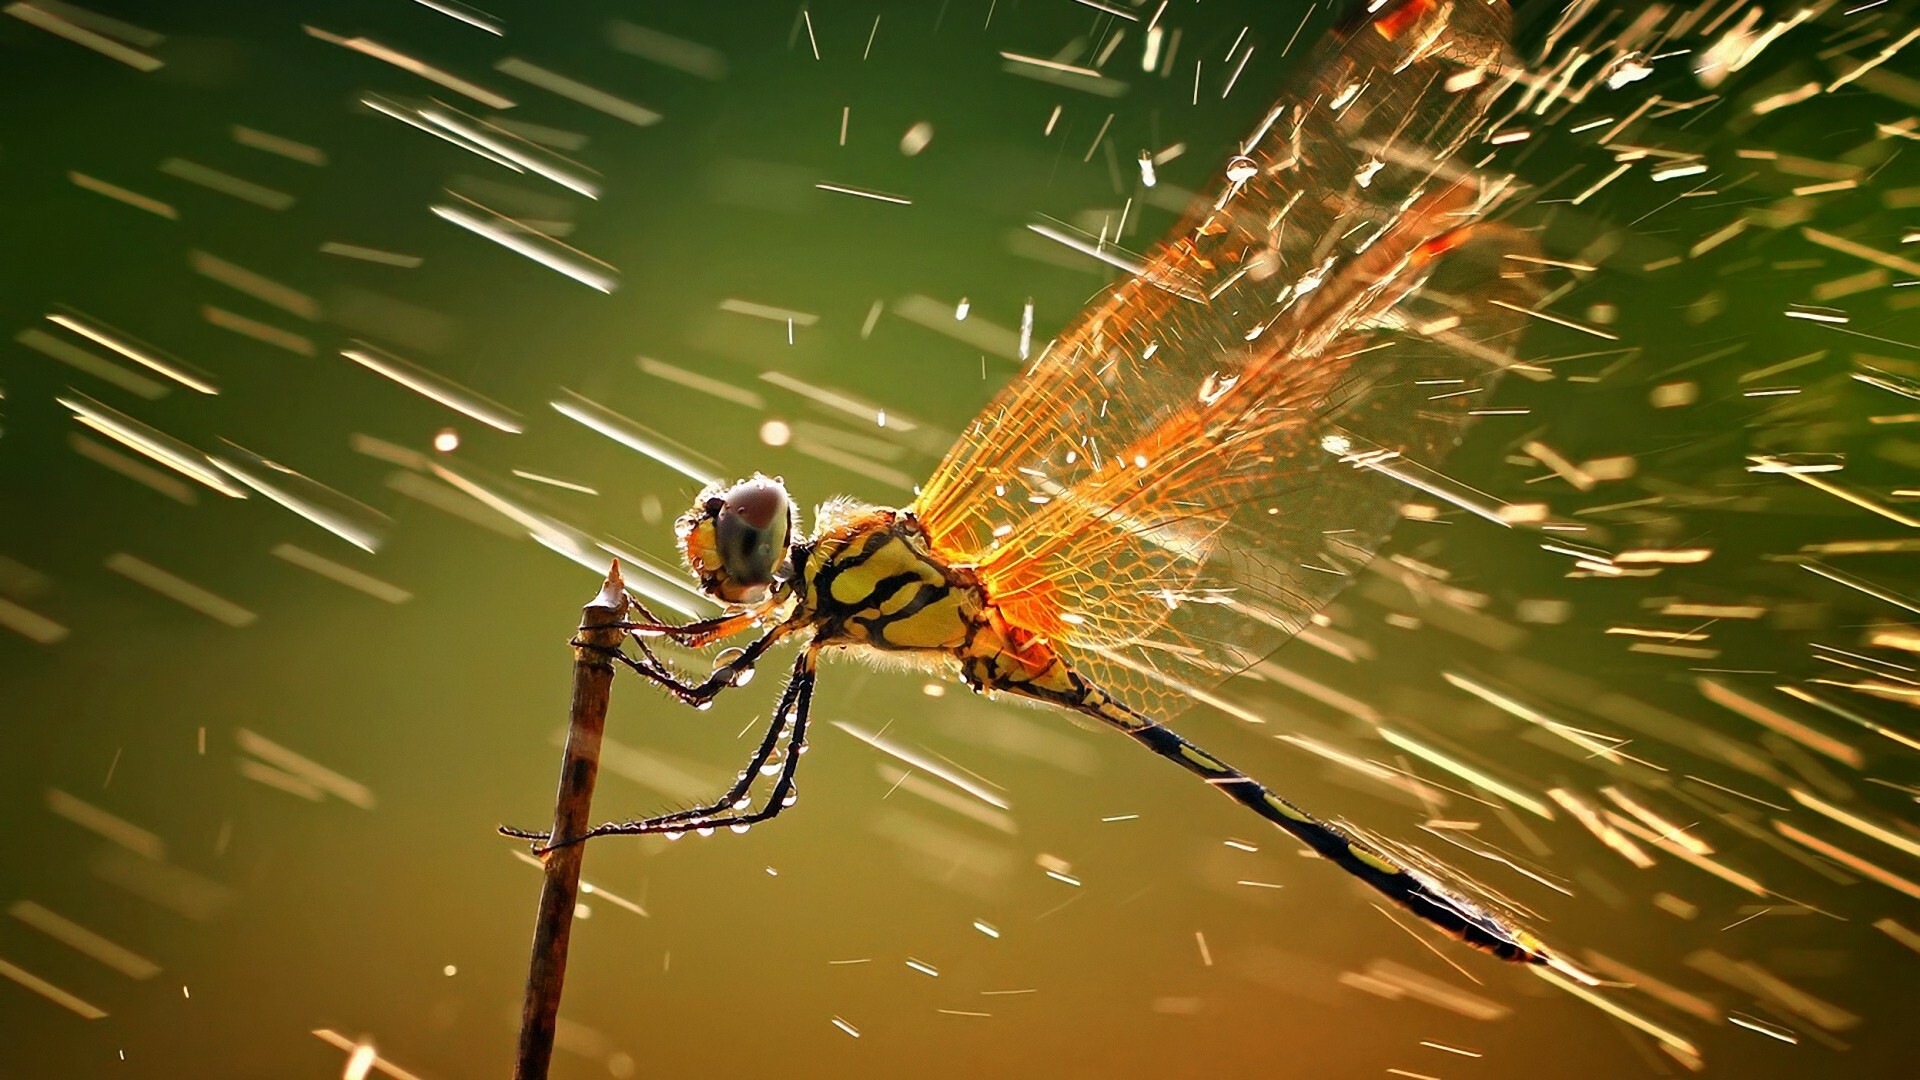 National Geographic: A beautiful and transient moment in the cycle of life, Dragonfly. 1920x1080 Full HD Wallpaper.